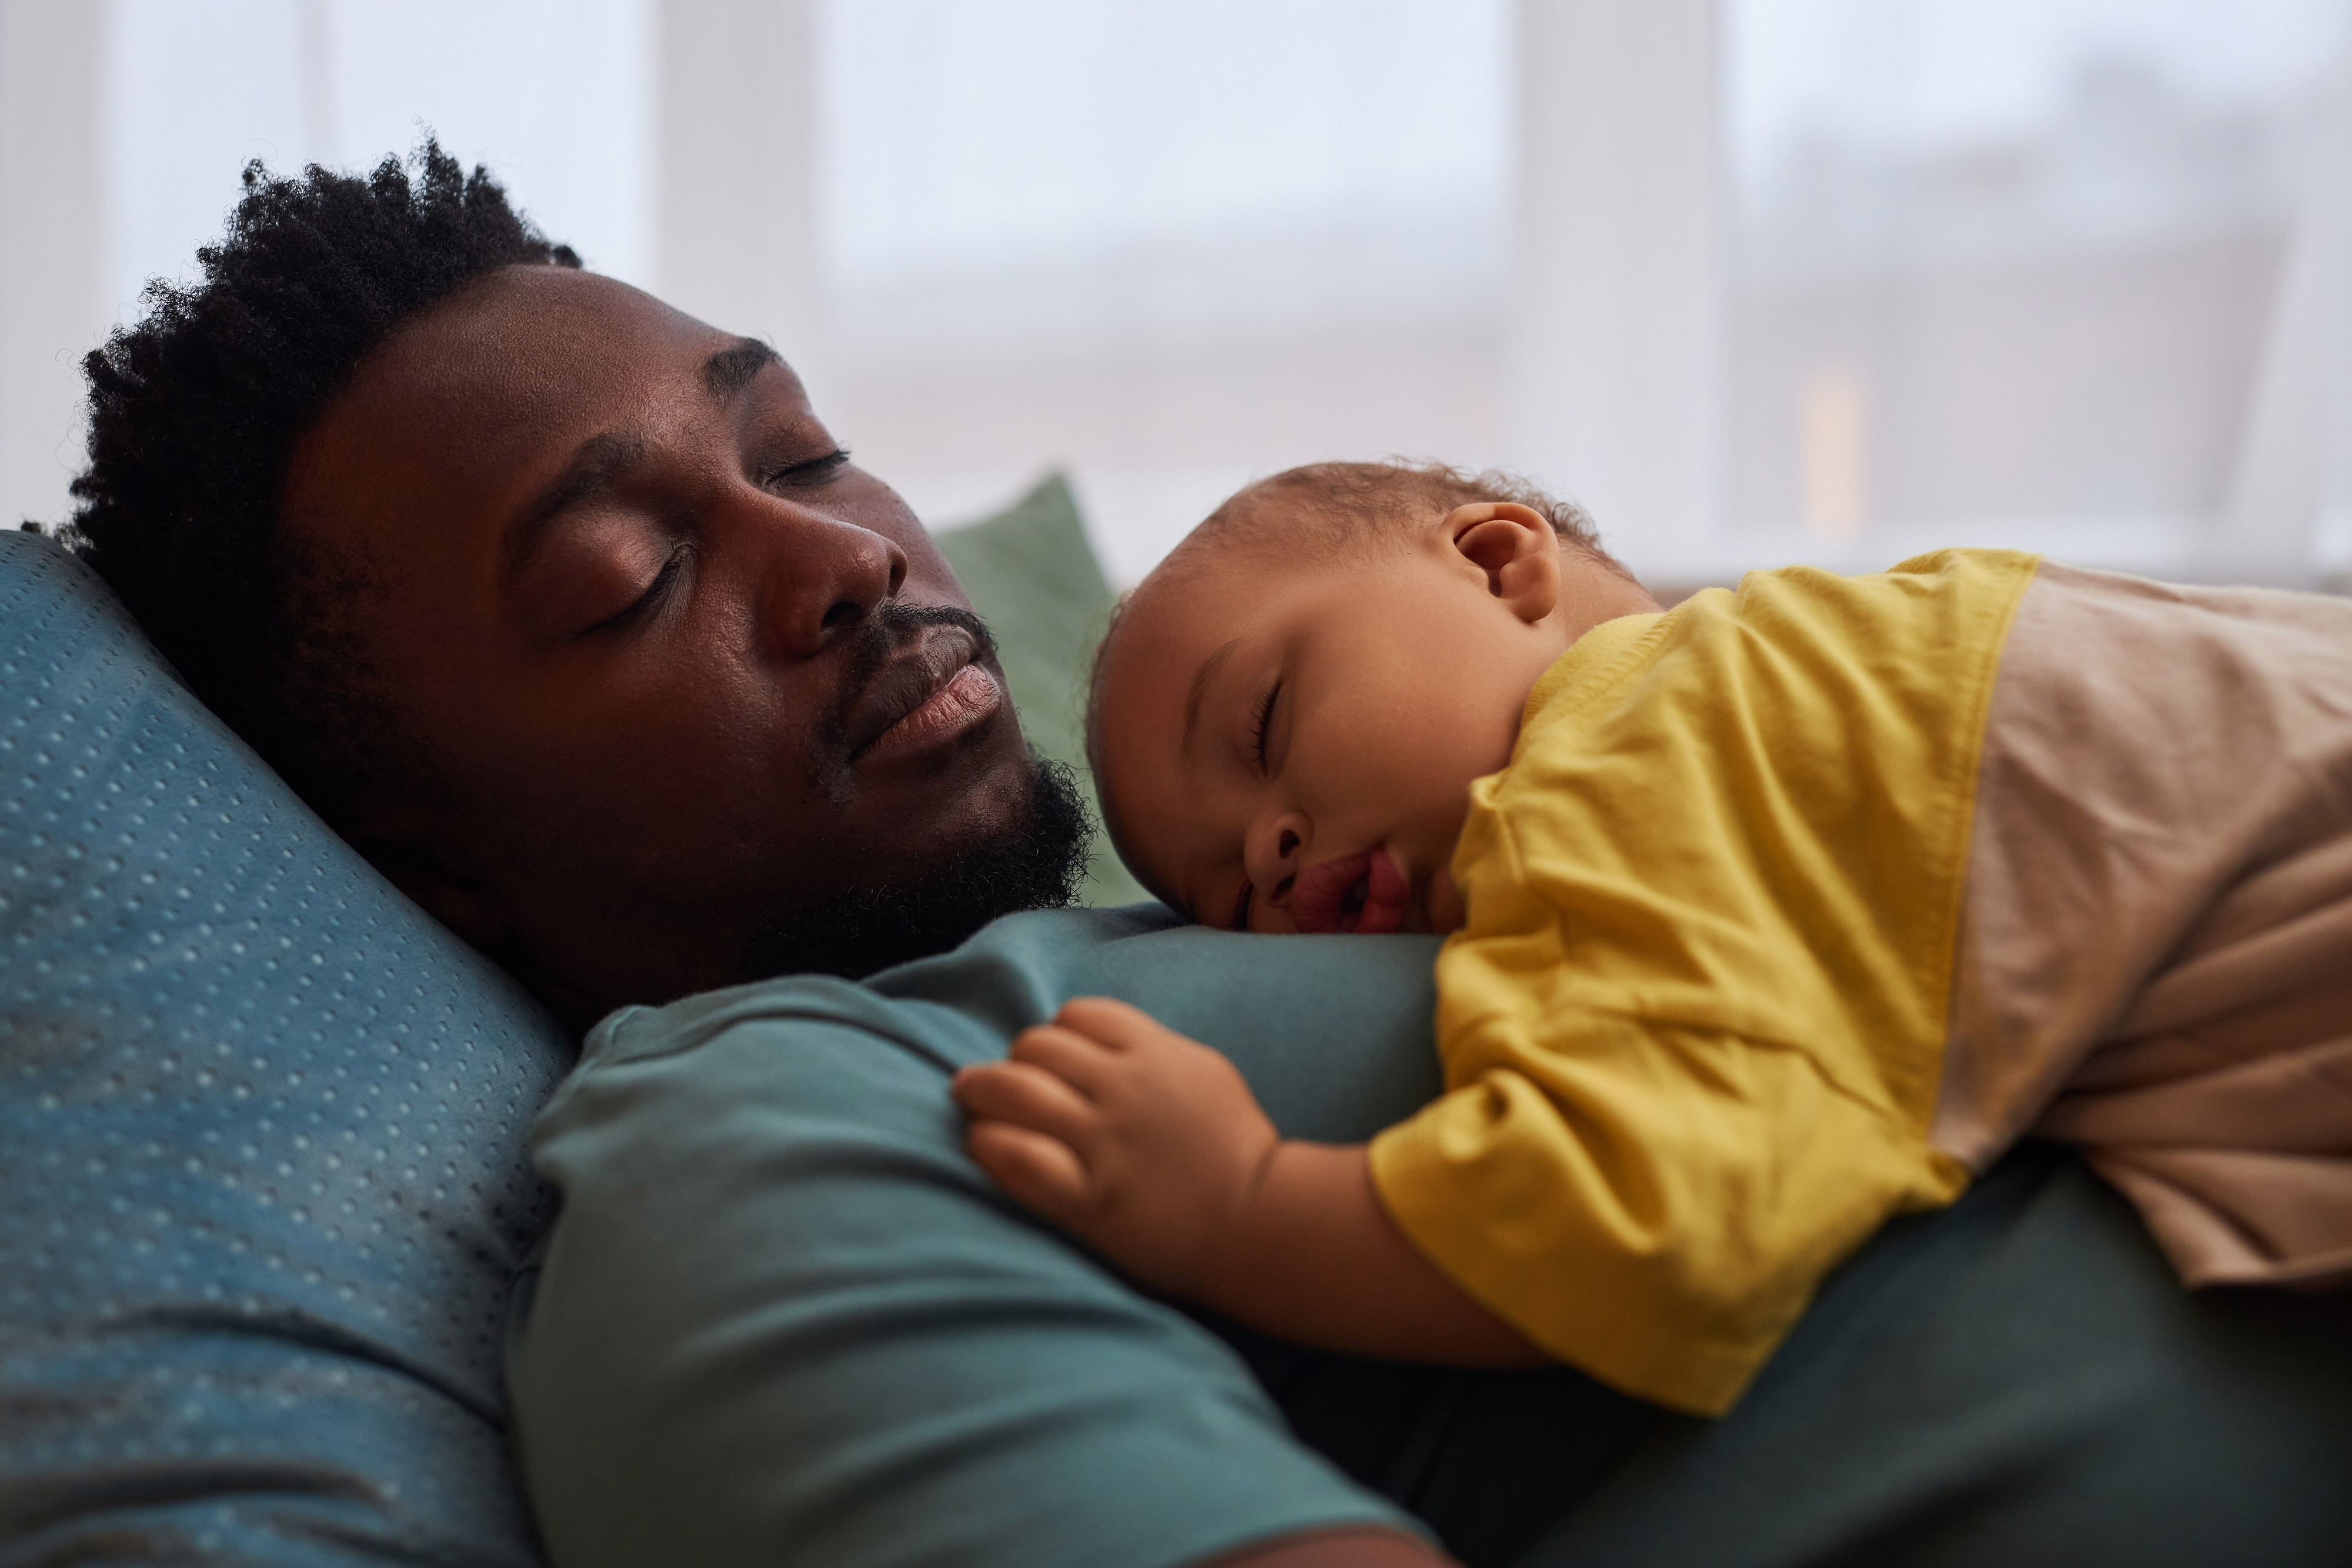 Man reclining with sleeping baby on his chest